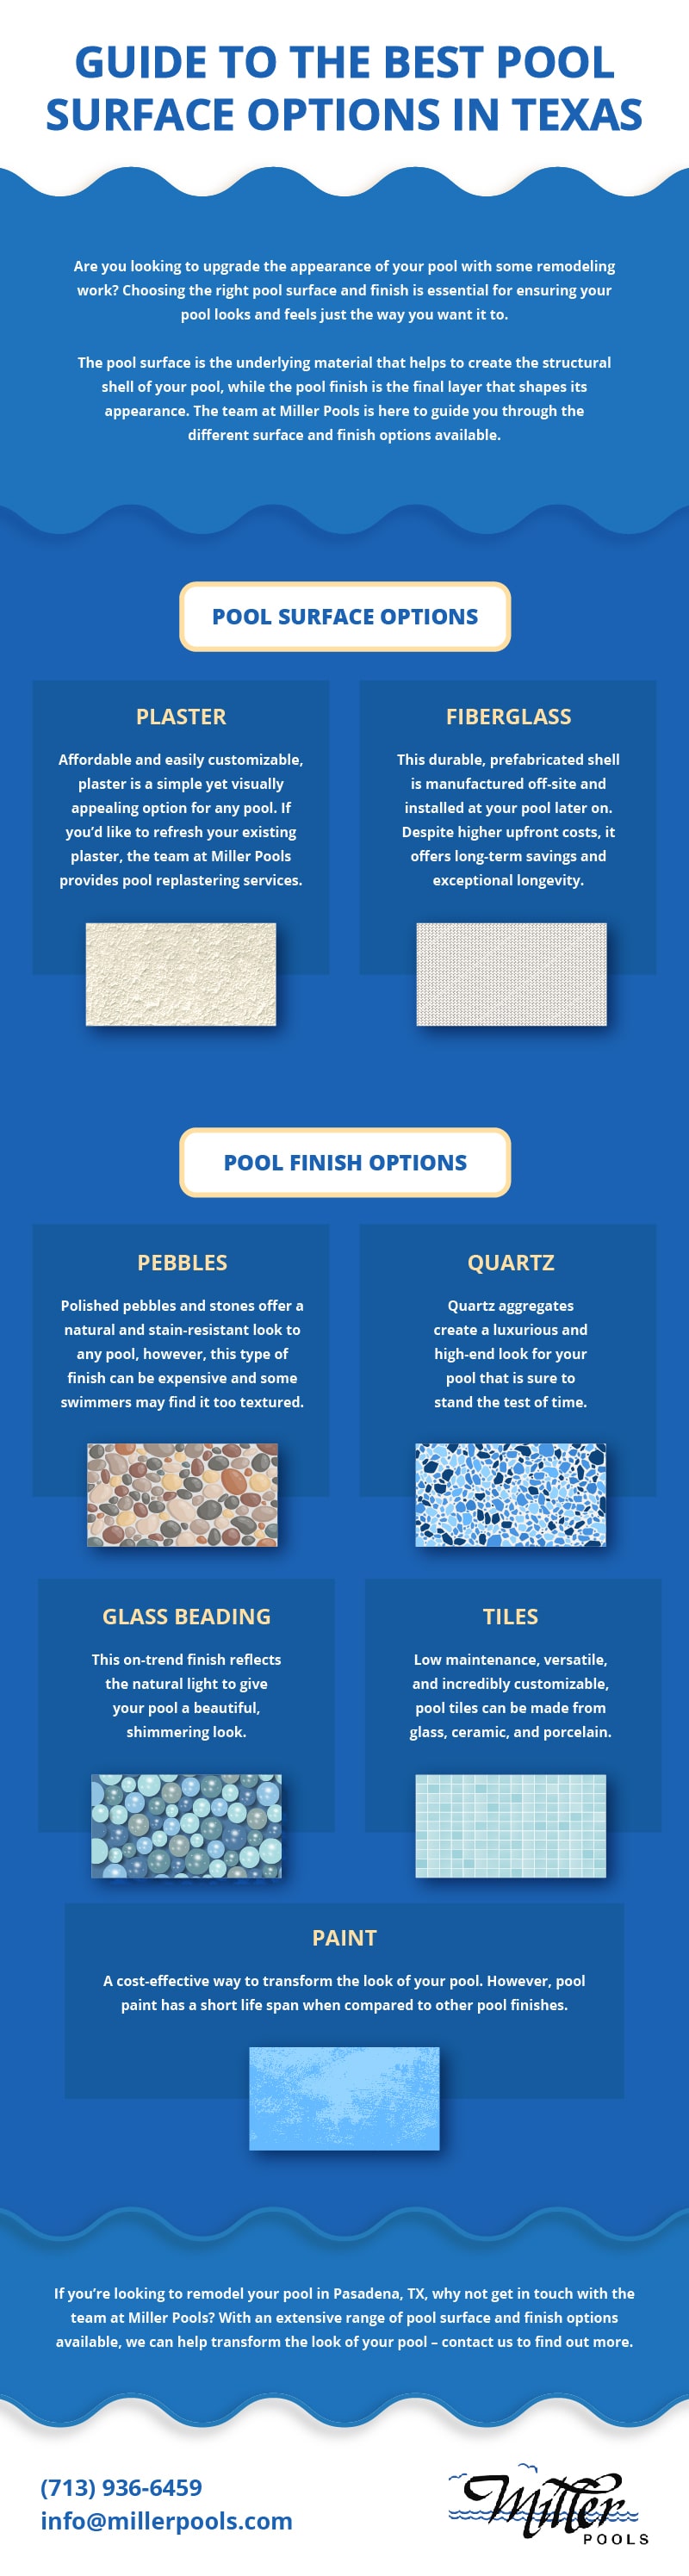 Best pool surface options in Texas 